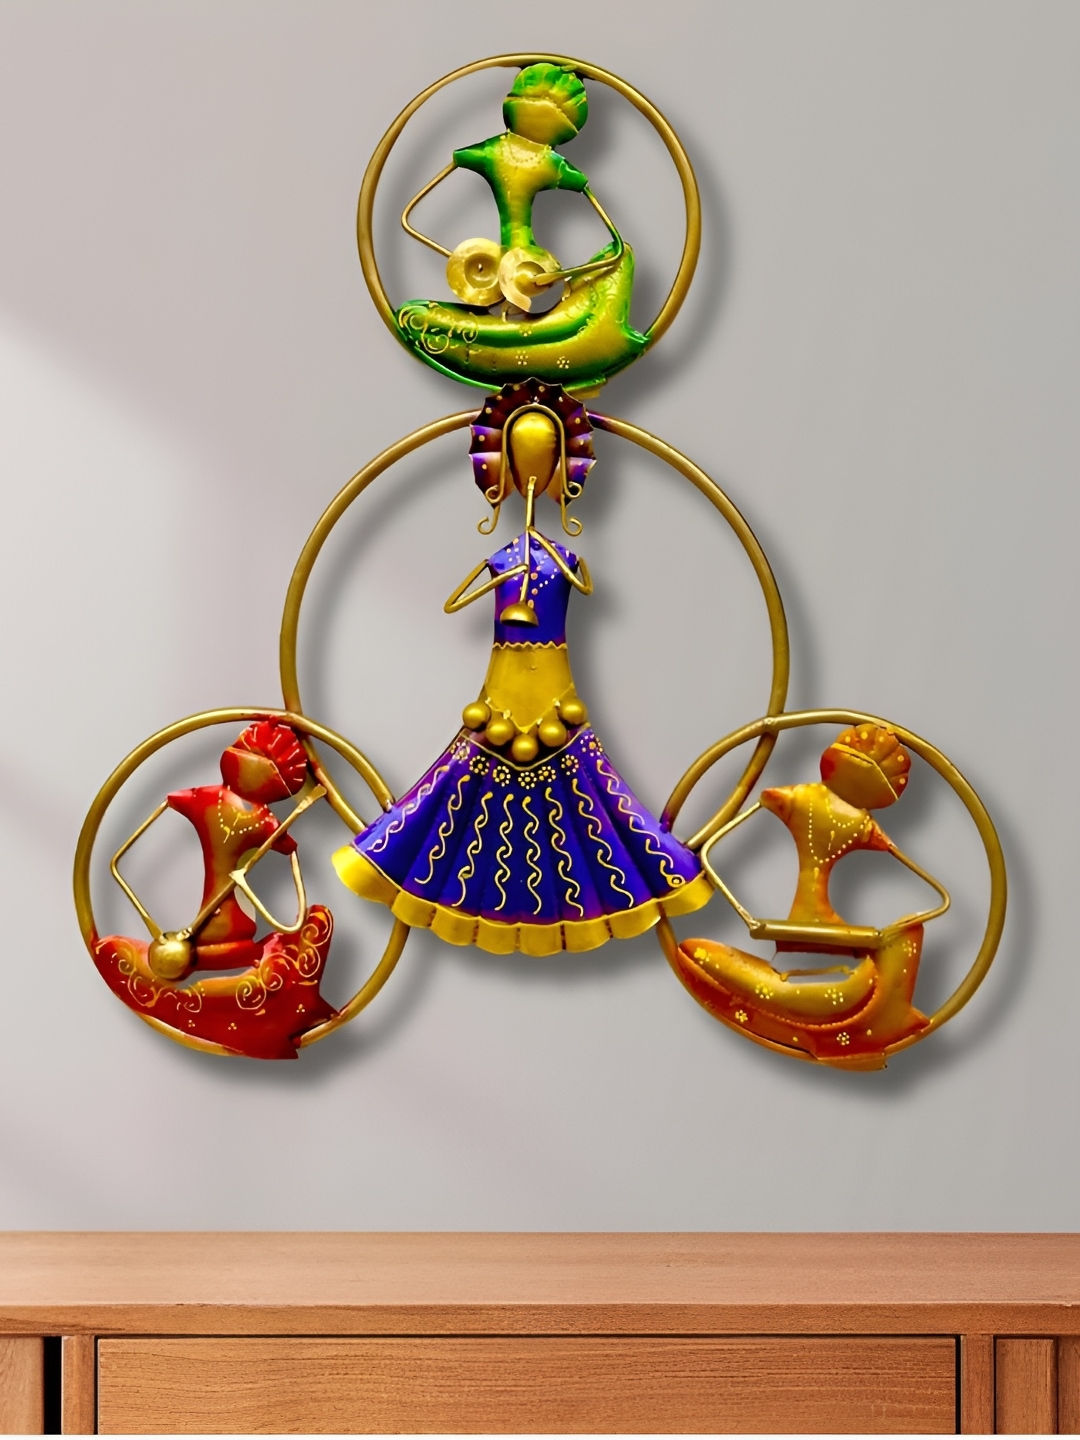 

PRANJALS HOUSE Yellow & Blue 4 Musicians Dolls Metal Wall Hangings, Gold